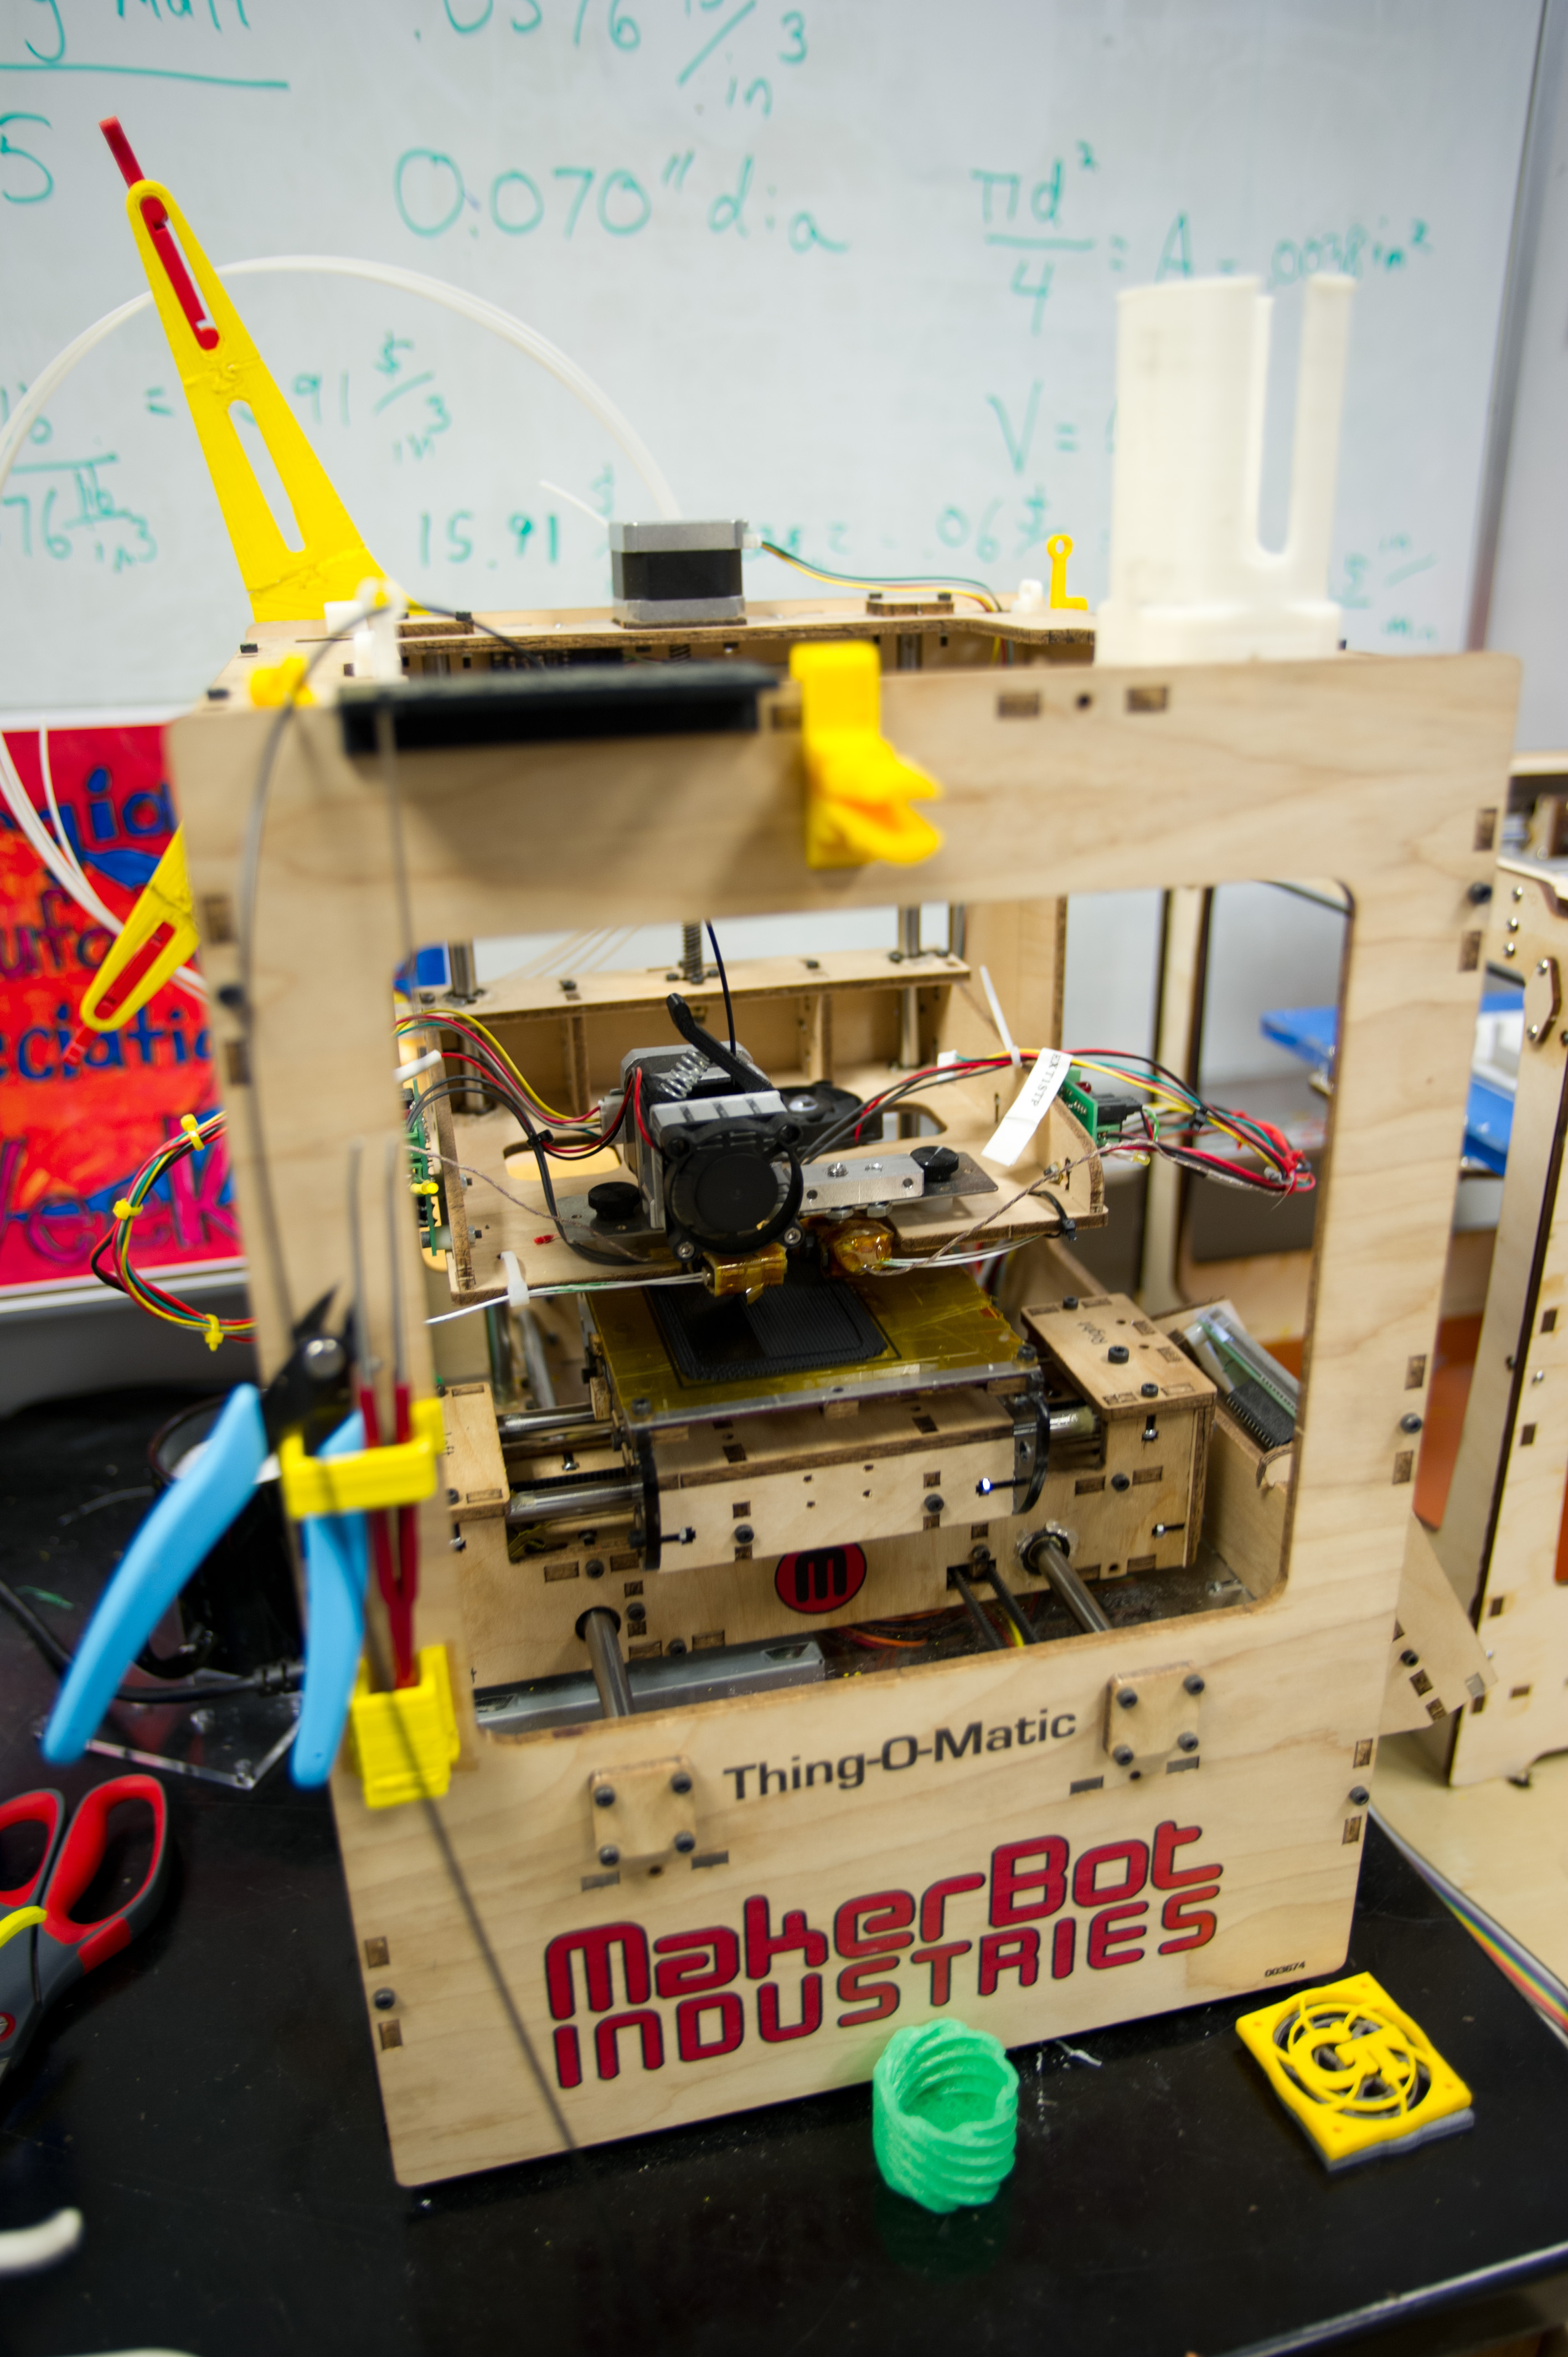 Georgia Tech's Makers Club runs the Invention Studio, where equipment is made available to students for use on personal projects as well as coursework. Displayed are some "experiments" members of the studio created.